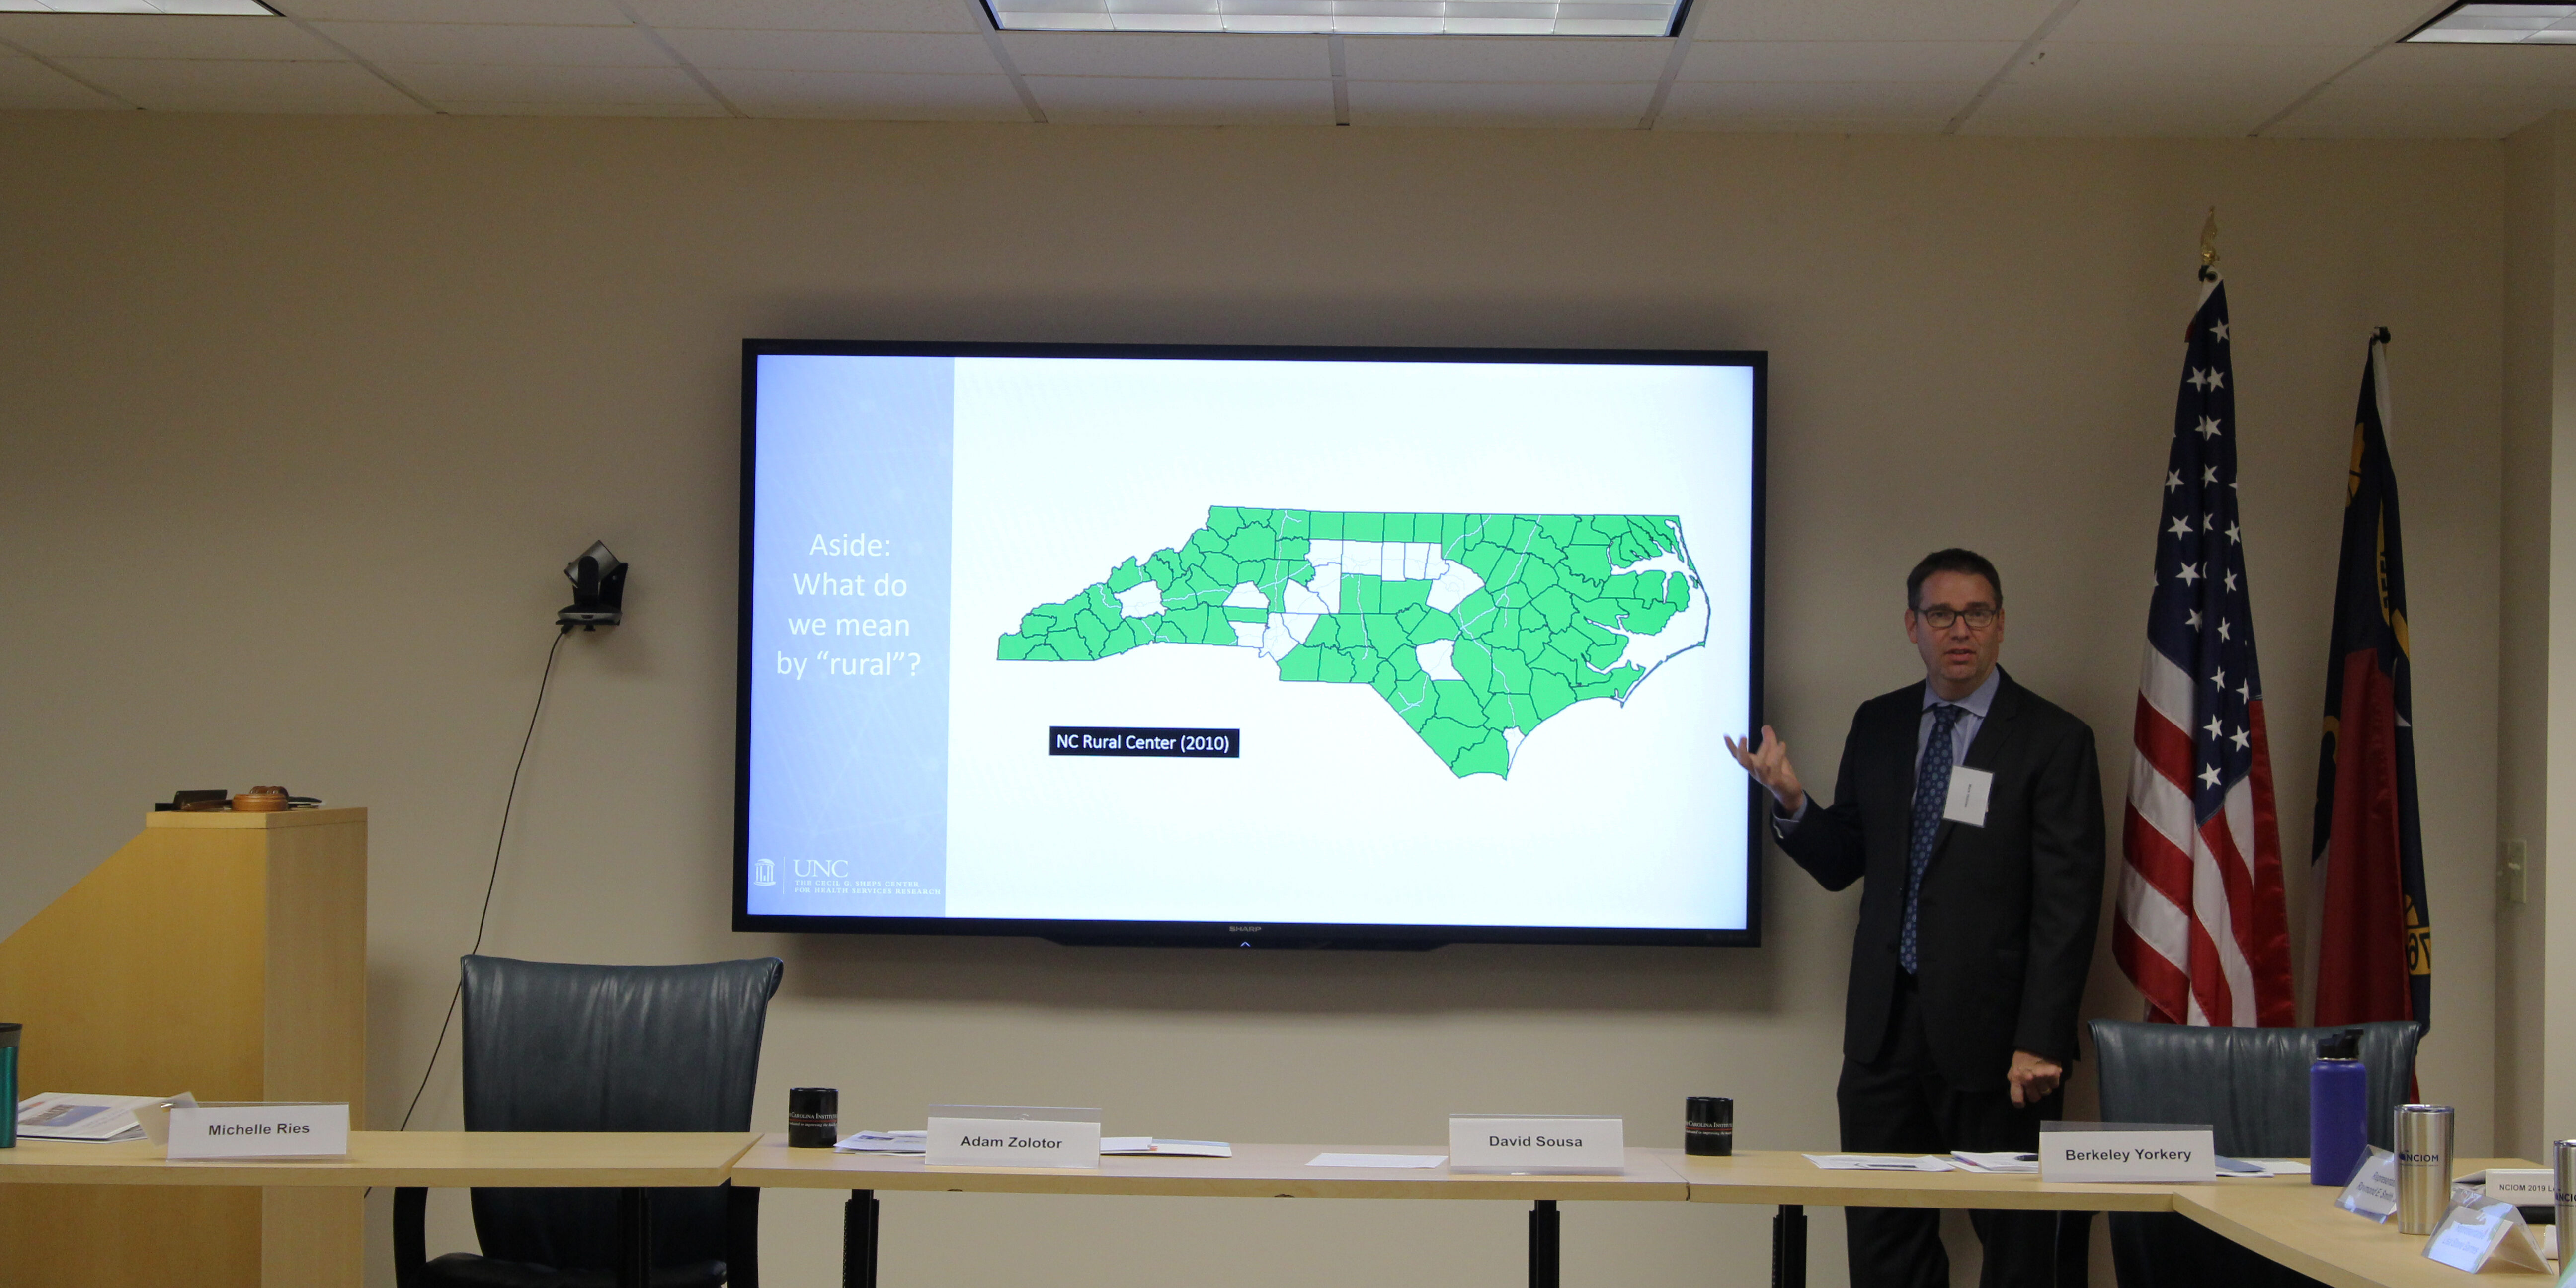 Man gestures at presentation with NC map